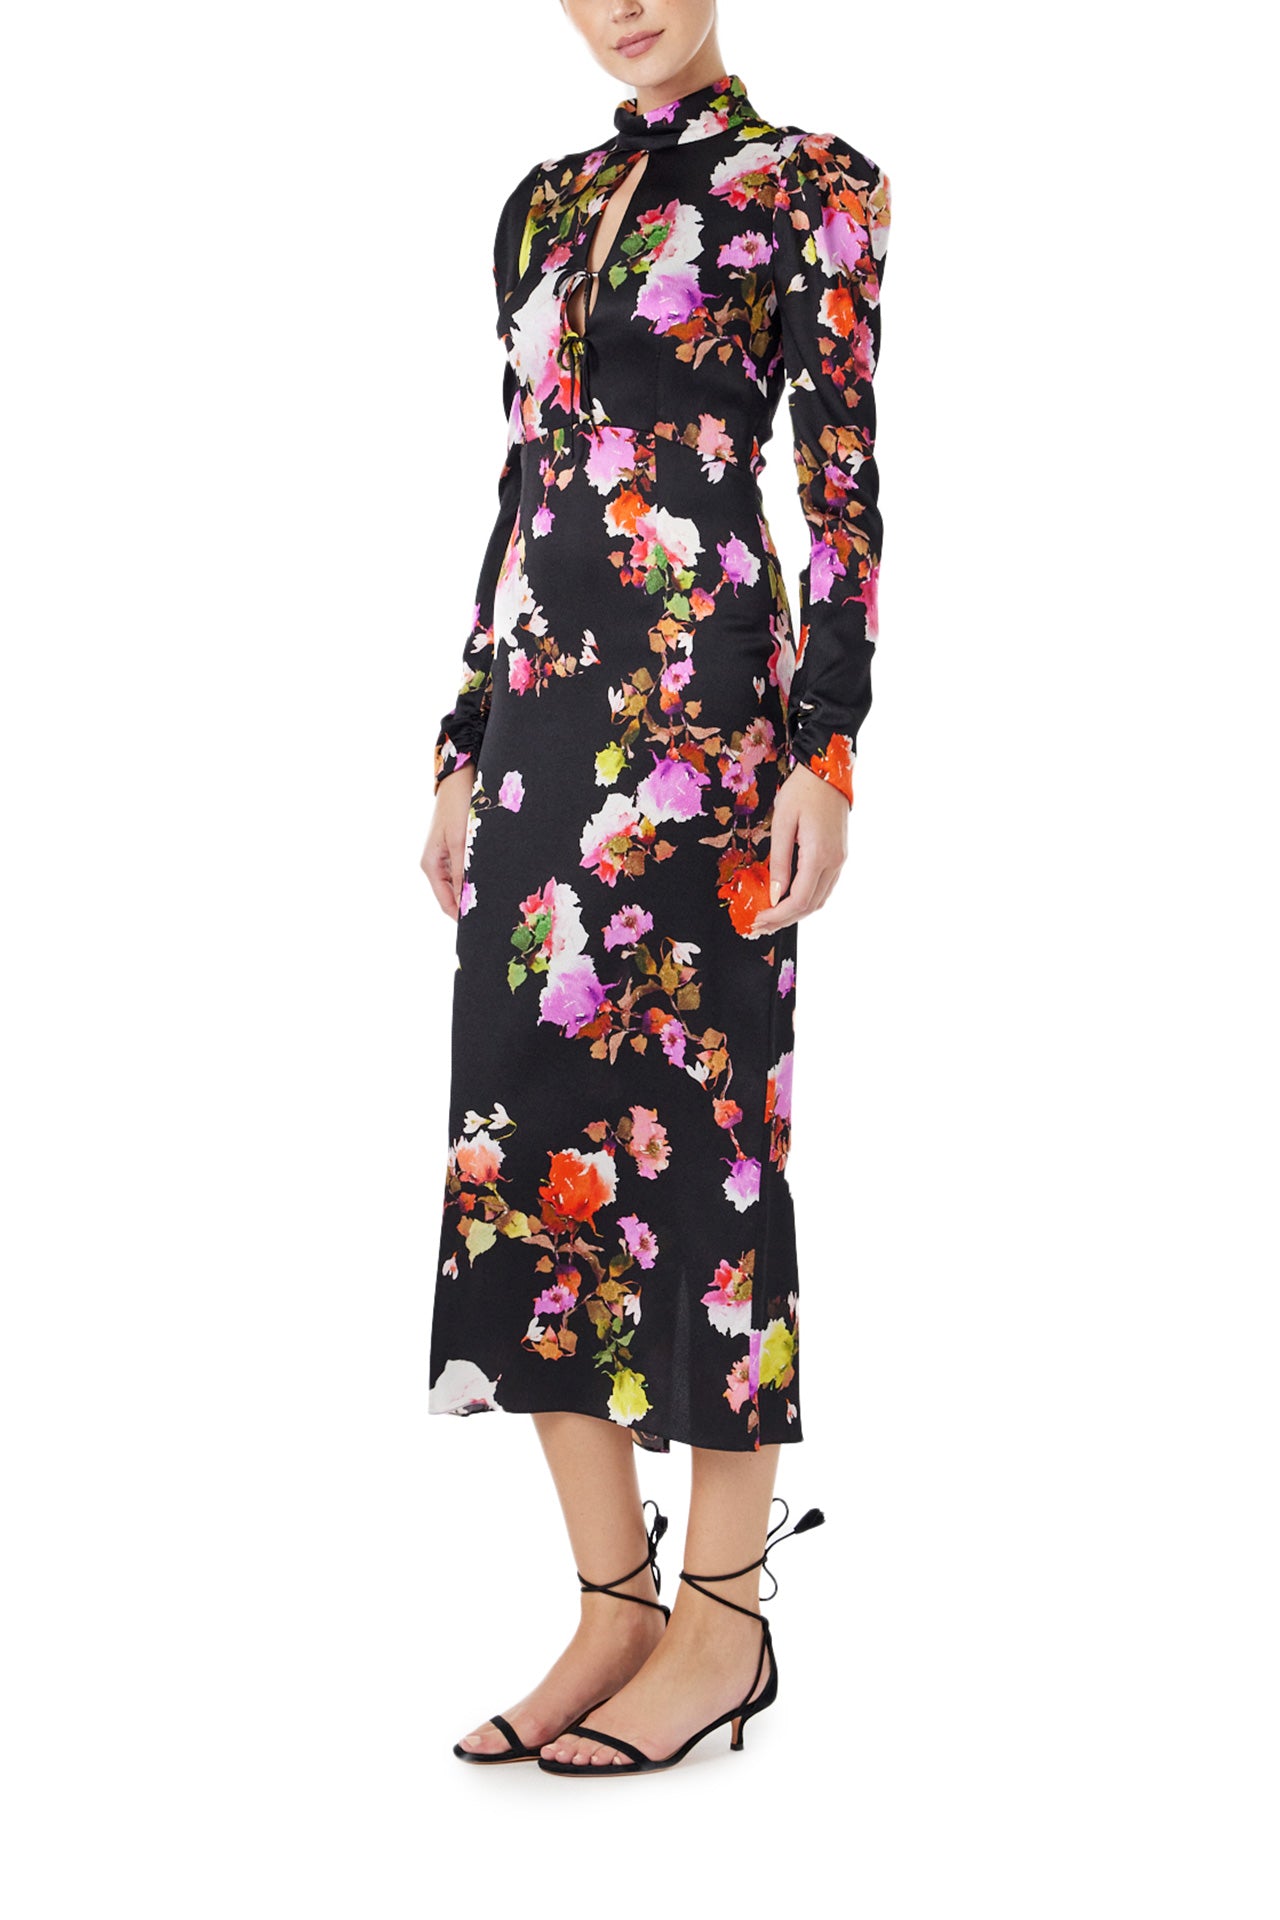 Monique Lhuillier Spring 2024 long sleeve midi dress with high neck and tied front keyhole bodice in black floral hammered silk - left.